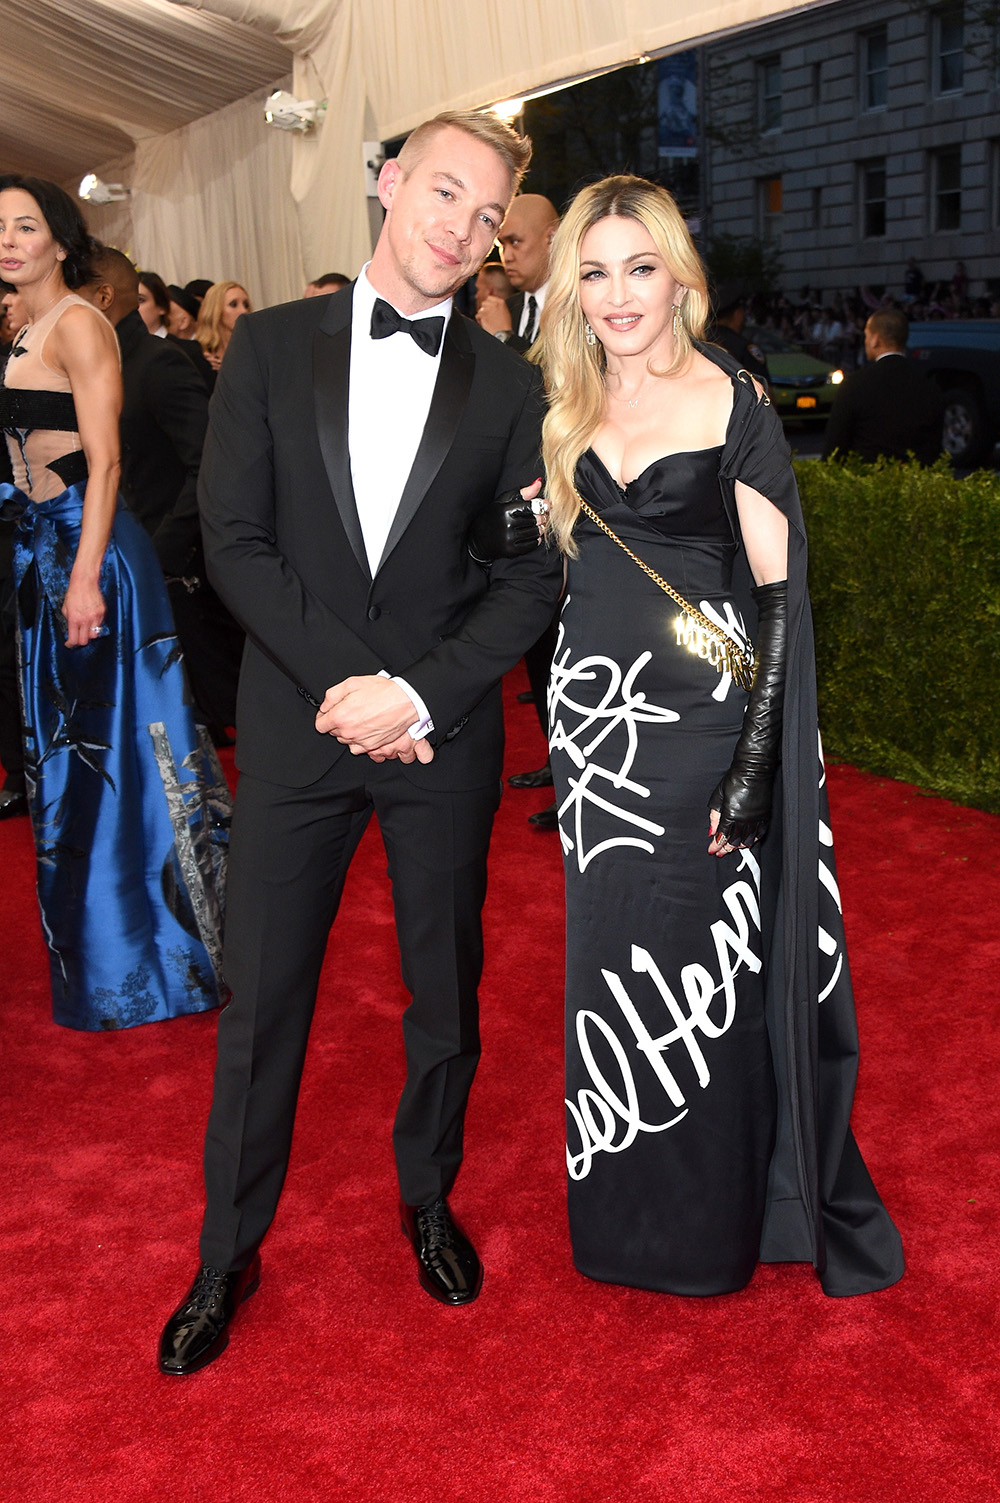 NEW YORK, NY - MAY 04:  Diplo and Madonna attend the "China: Through The Looking Glass" Costume Institute Benefit Gala at the Metropolitan Museum of Art on May 4, 2015 in New York City.  (Photo by Larry Busacca/Getty Images)